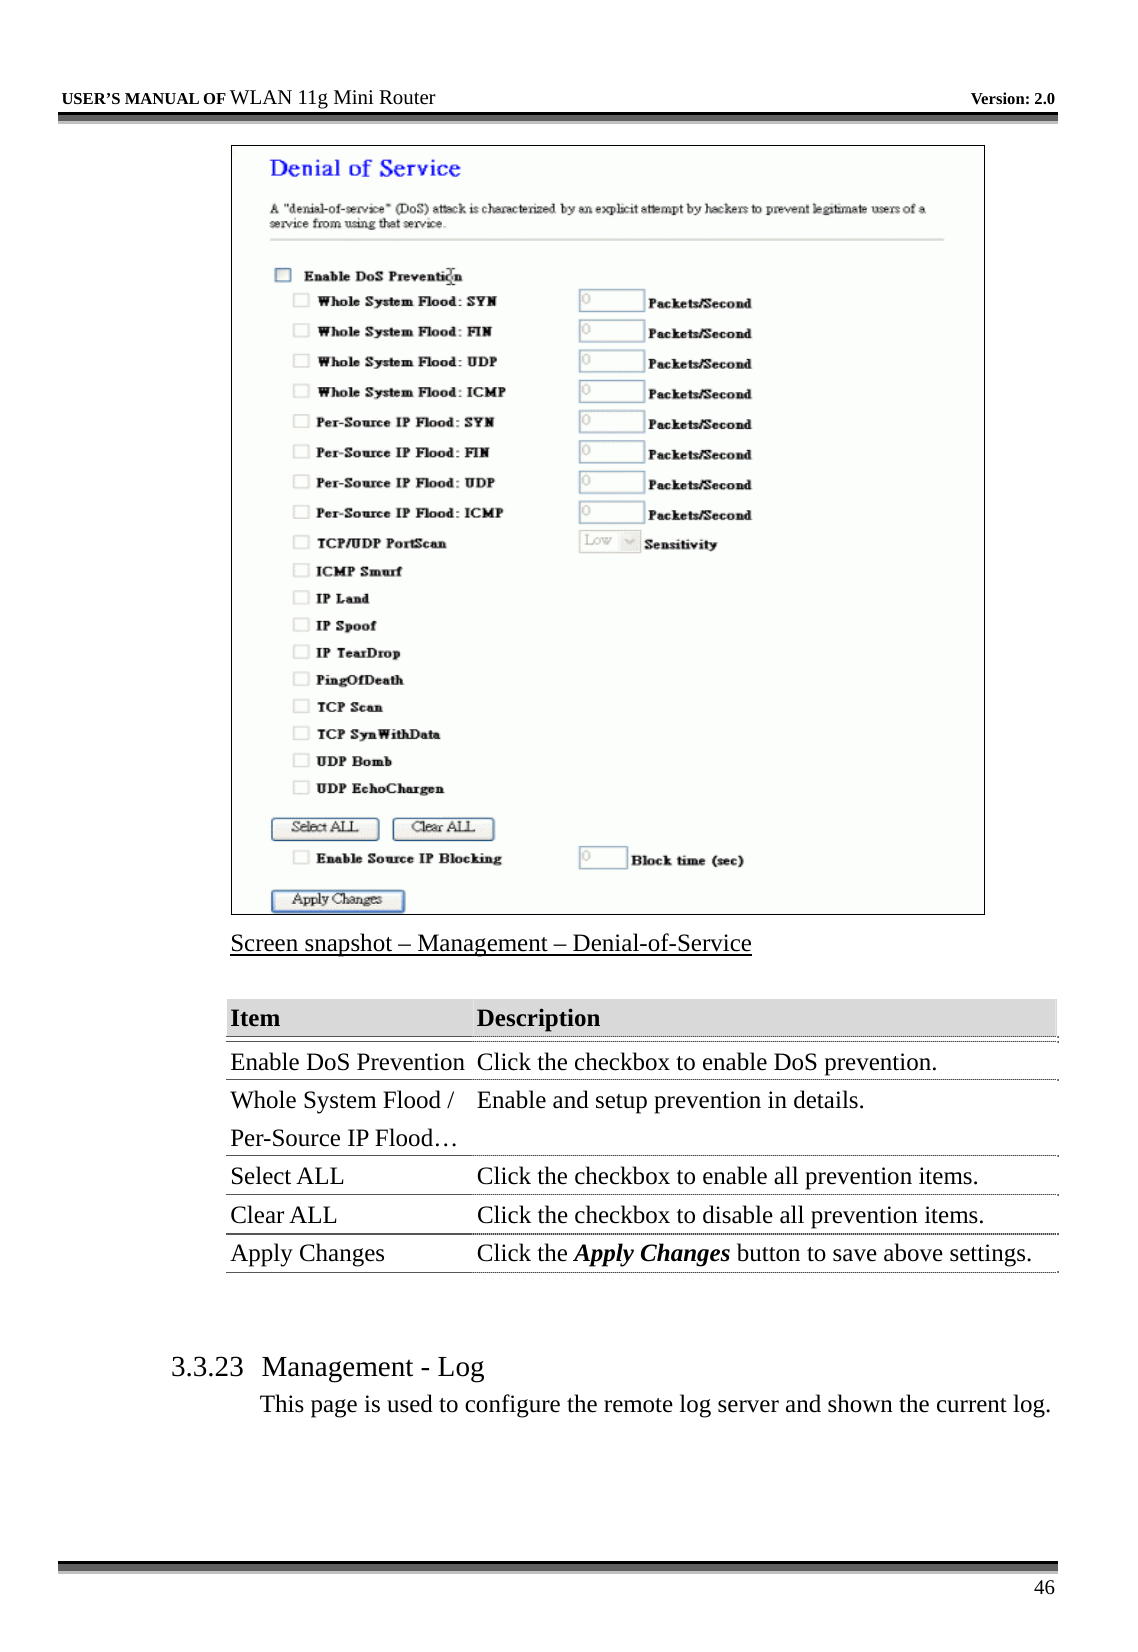   USER’S MANUAL OF WLAN 11g Mini Router   Version: 2.0     46  Screen snapshot – Management – Denial-of-Service  Item  Description   Enable DoS Prevention Click the checkbox to enable DoS prevention. Whole System Flood / Per-Source IP Flood… Enable and setup prevention in details. Select ALL  Click the checkbox to enable all prevention items. Clear ALL  Click the checkbox to disable all prevention items. Apply Changes  Click the Apply Changes button to save above settings.   3.3.23  Management - Log This page is used to configure the remote log server and shown the current log.  